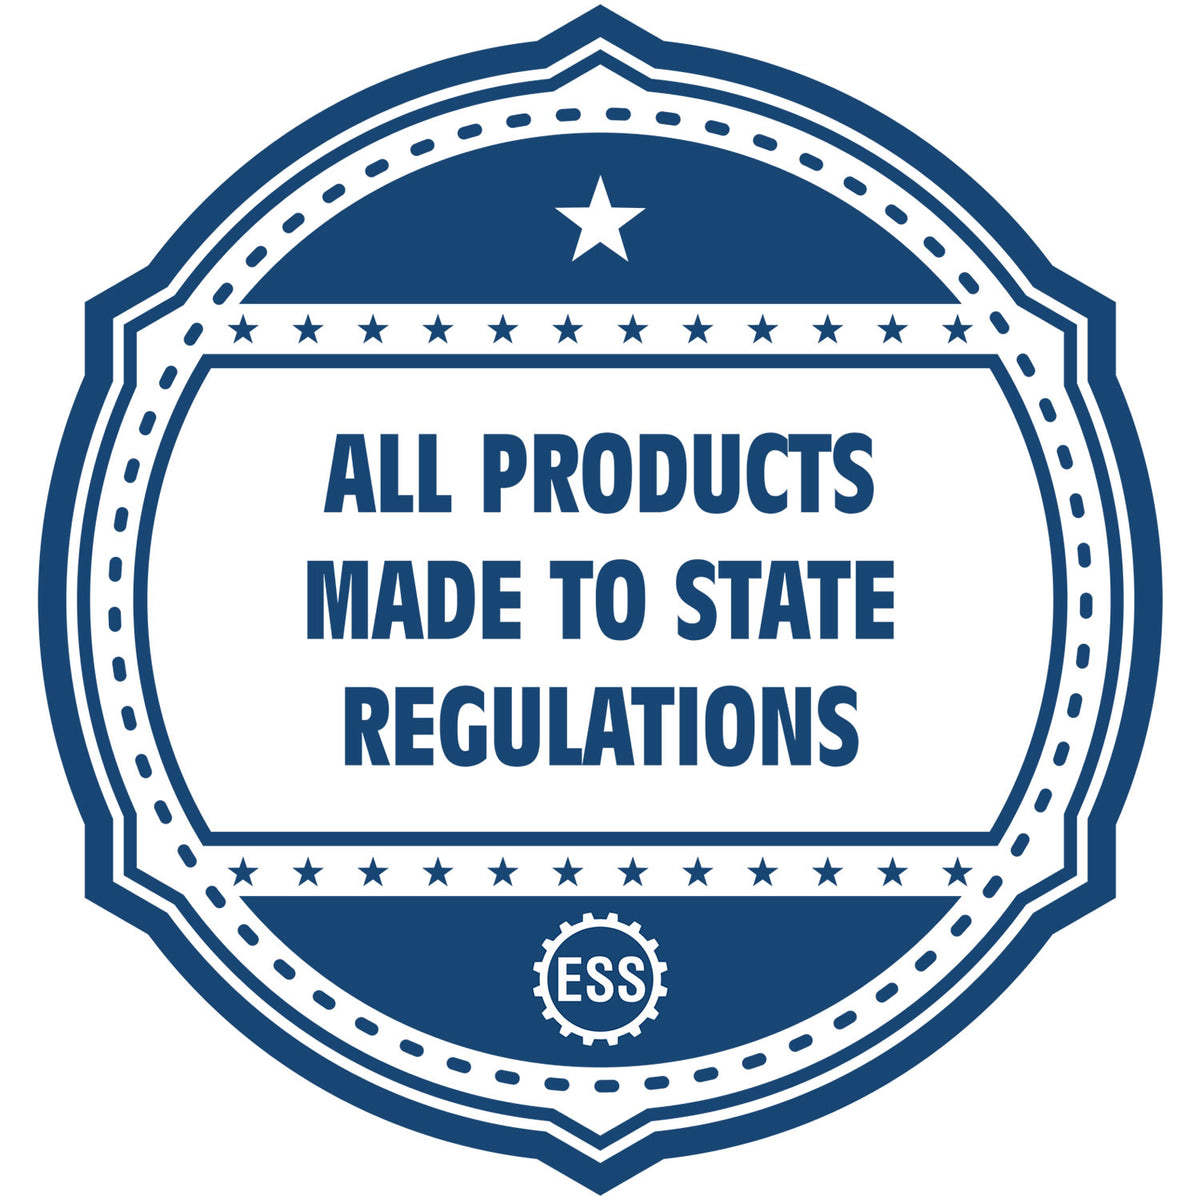 An icon or badge element for the Long Reach Maine Land Surveyor Seal showing that this product is made in compliance with state regulations.